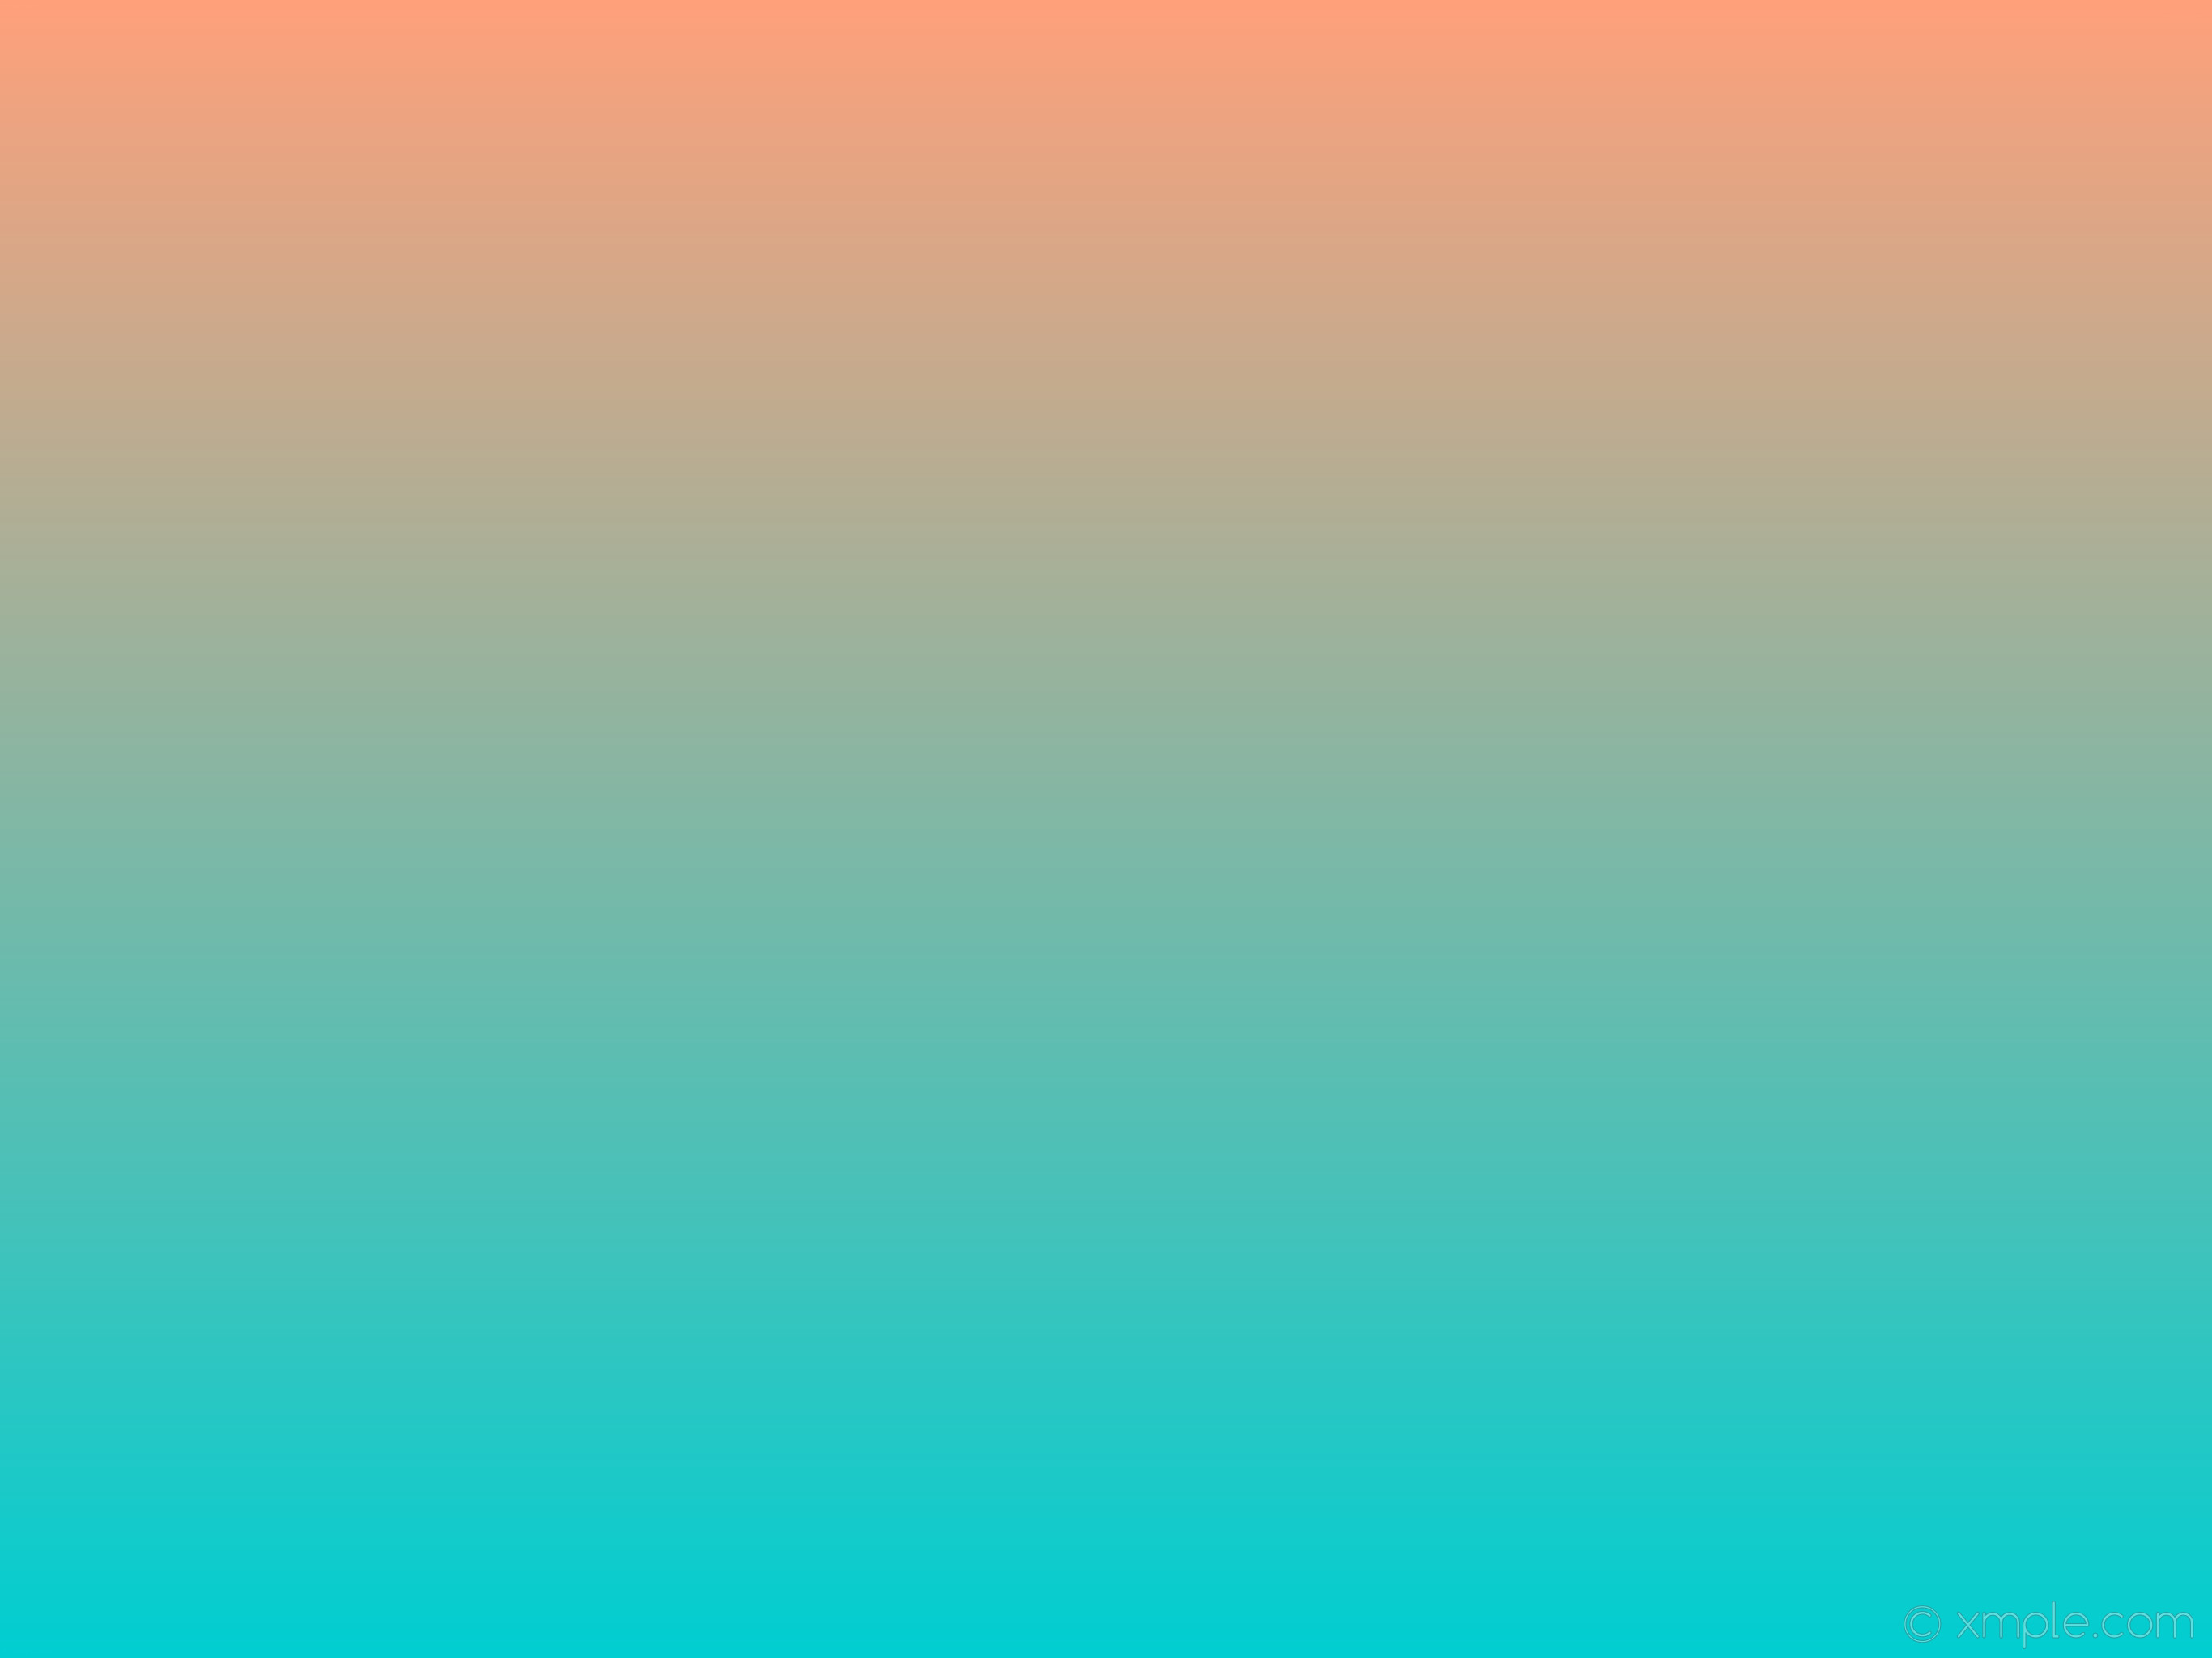 2732x2048 Wallpaper Gradient Blue Linear Red Light Green Blue And Red Ombre 2732x2048 Wallpaper Teahub Io